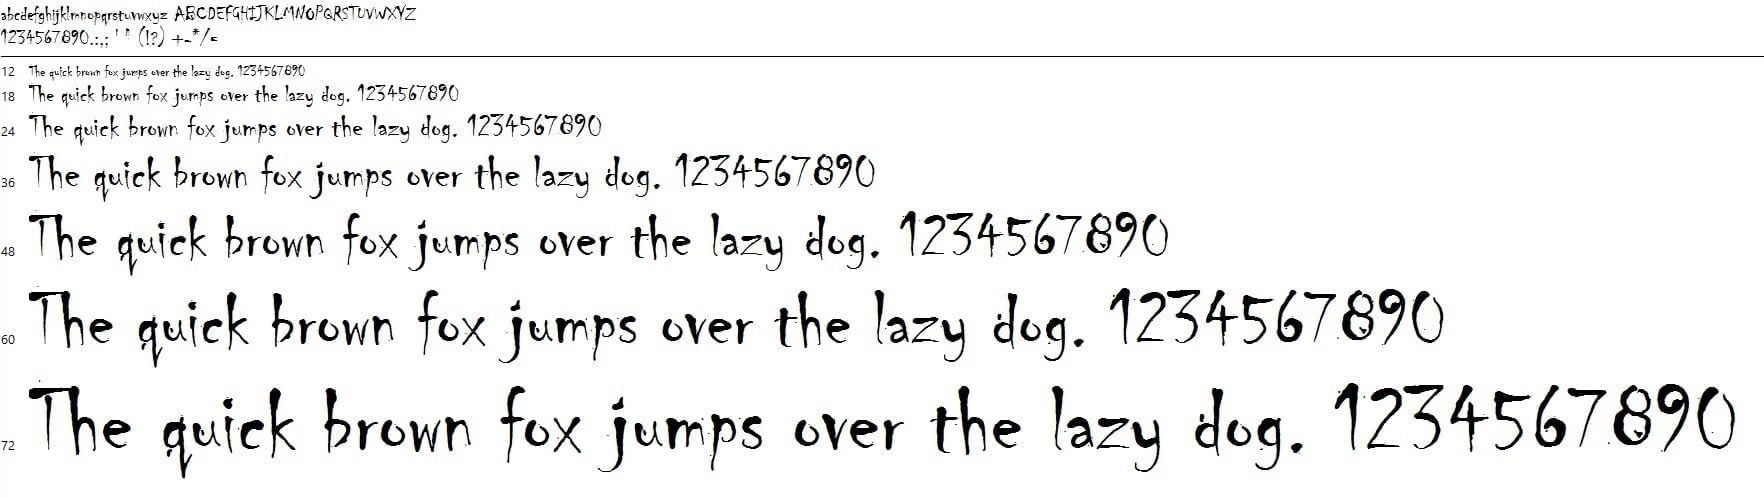 the quick brown fox jumps... example of a font for powerpoint